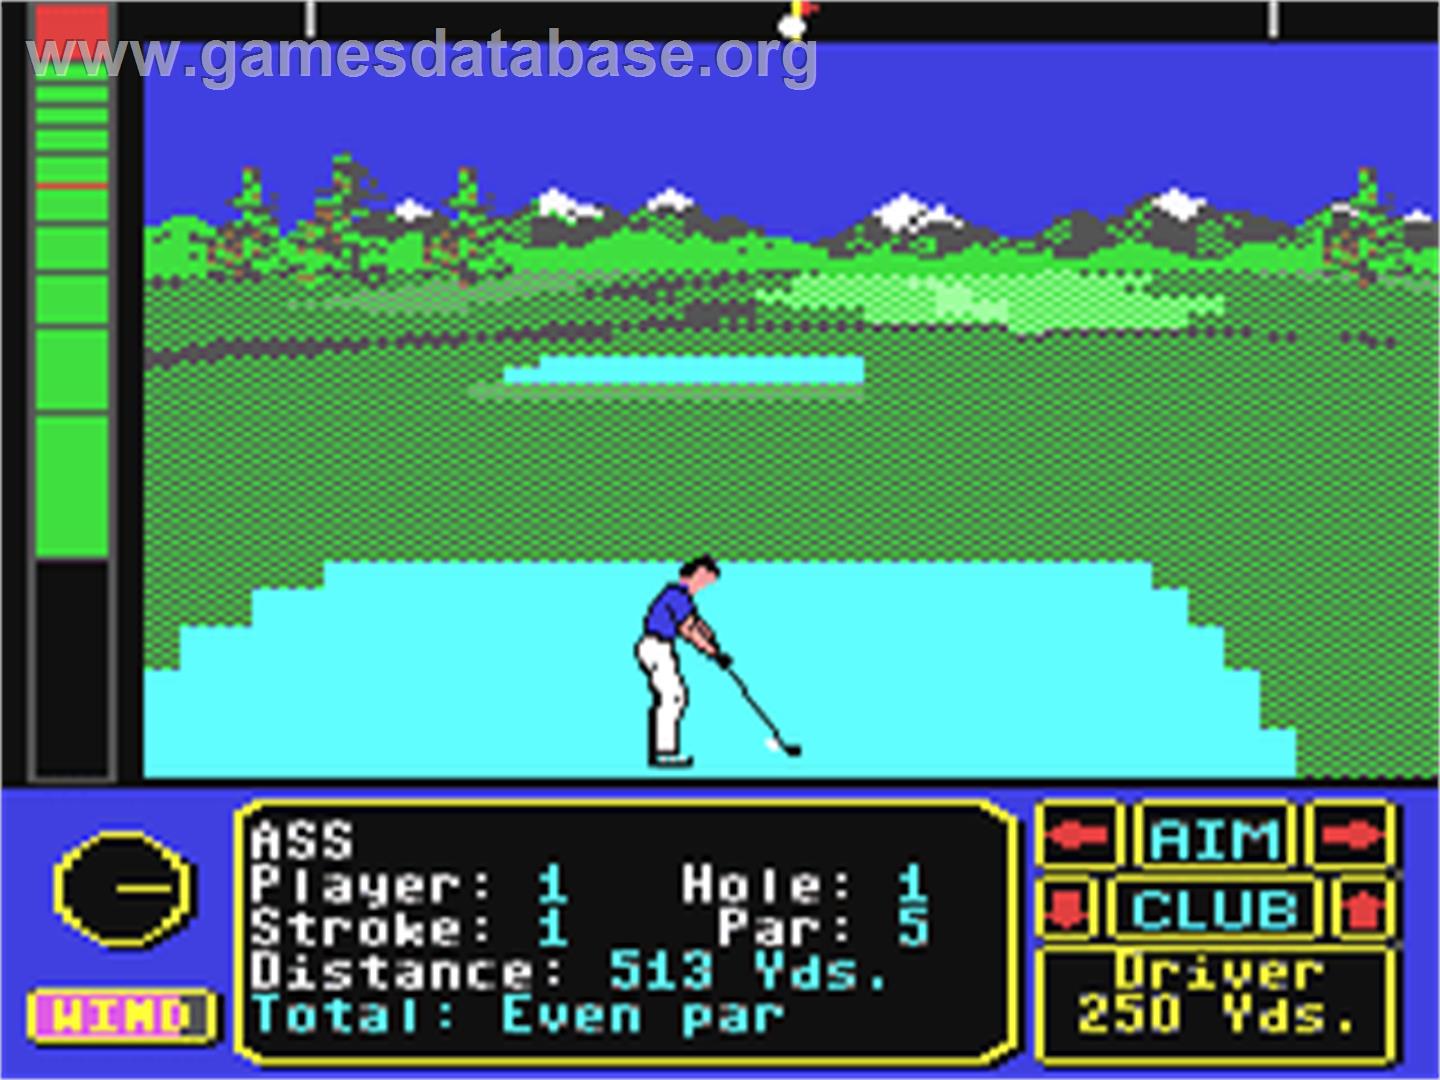 Jack Nicklaus' Greatest 18 Holes of Major Championship Golf - Commodore 64 - Artwork - In Game